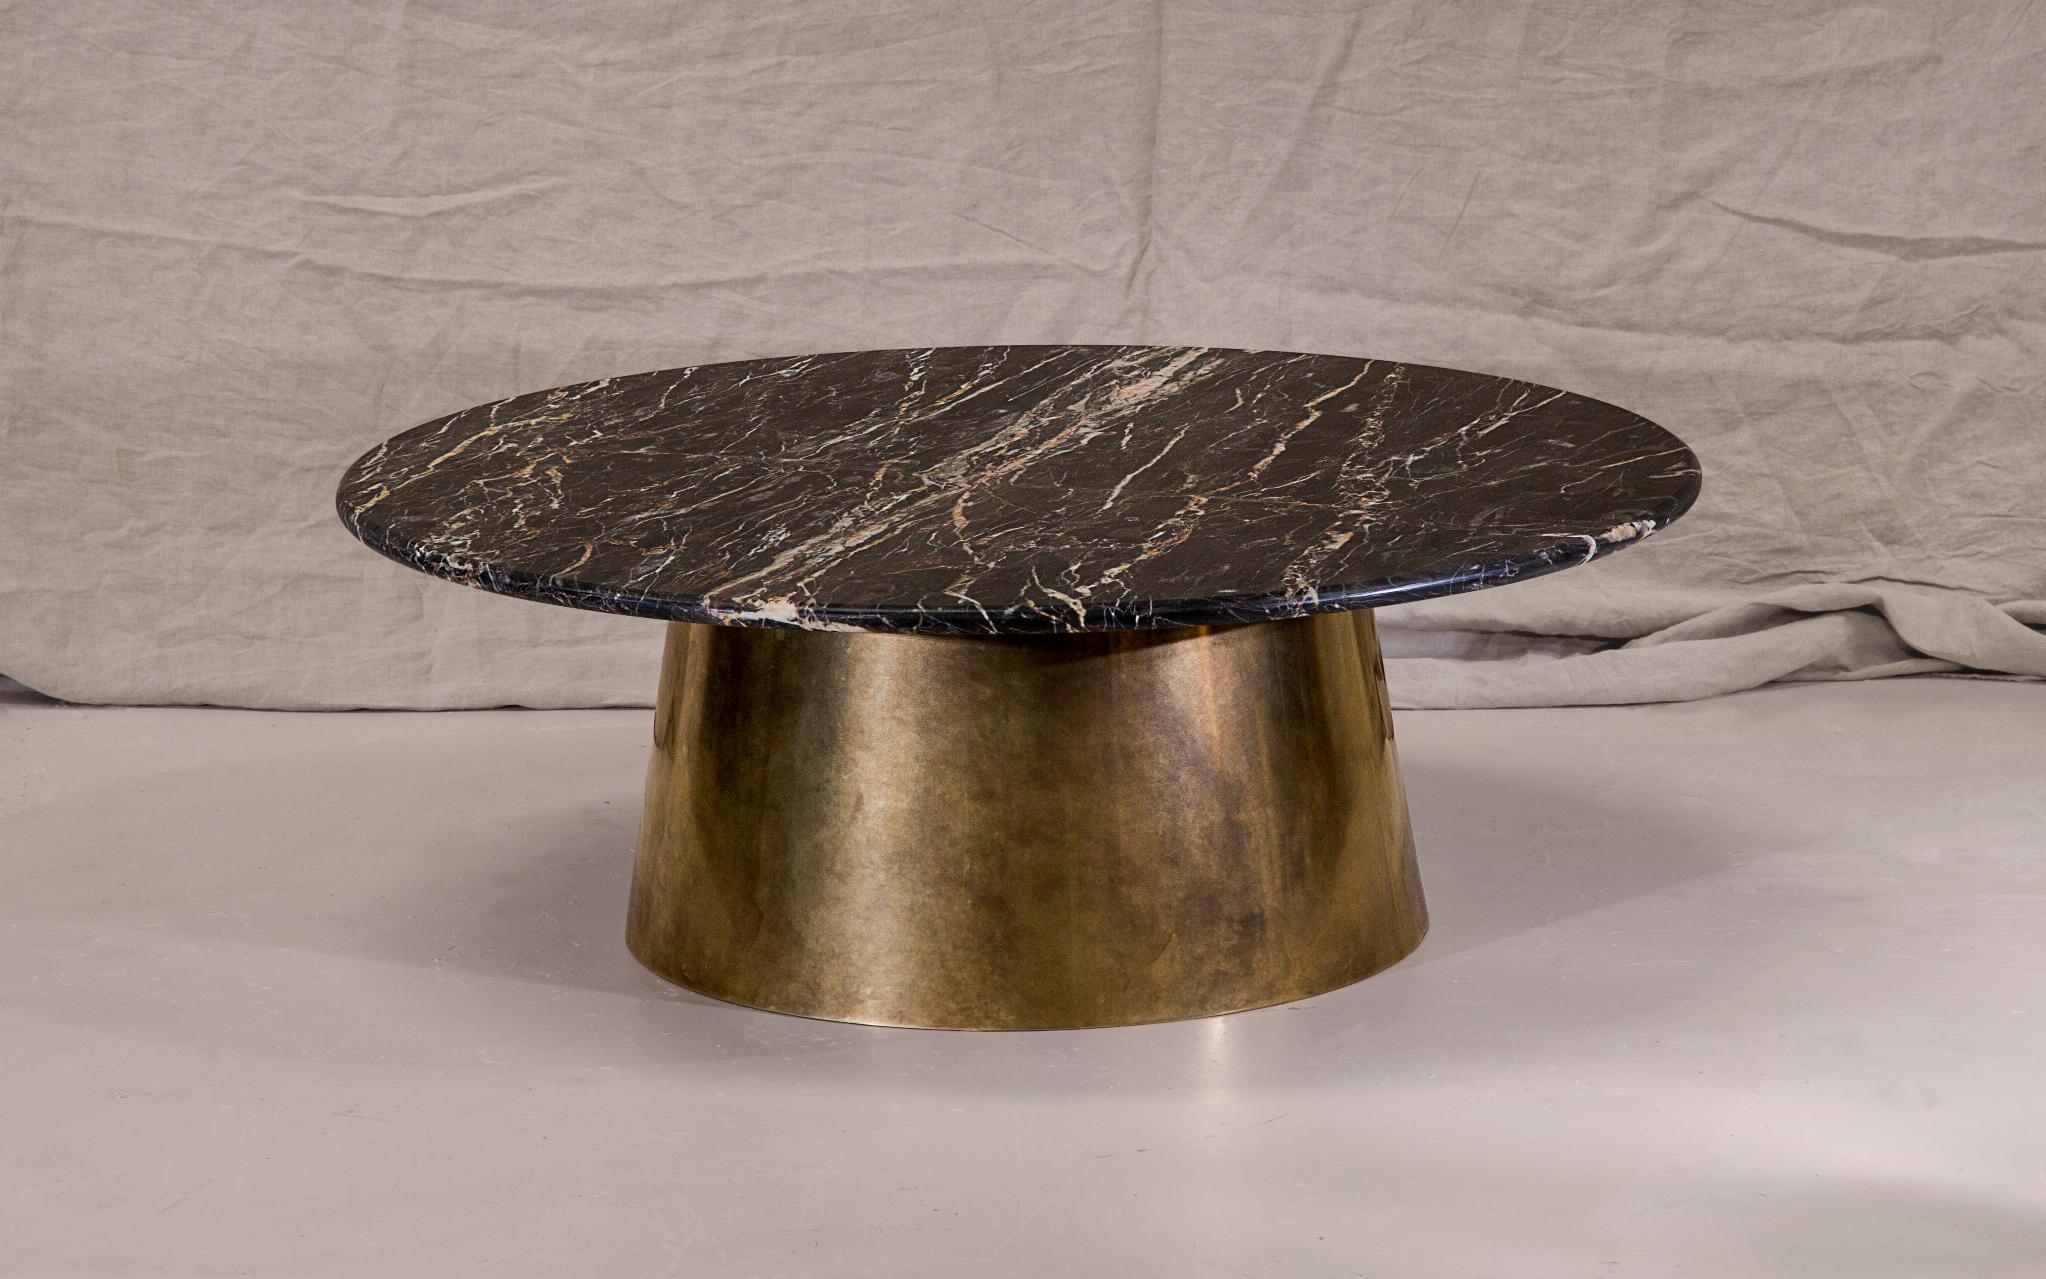 Brass and marble coffee table signed by Novocastrian
Dimensions: 35 x 100 x 100 cm
Materials: Rare British Marble (subject to availability), base in Patinated Brass
Each iteration is a truly unique creation, many of the available marbles will